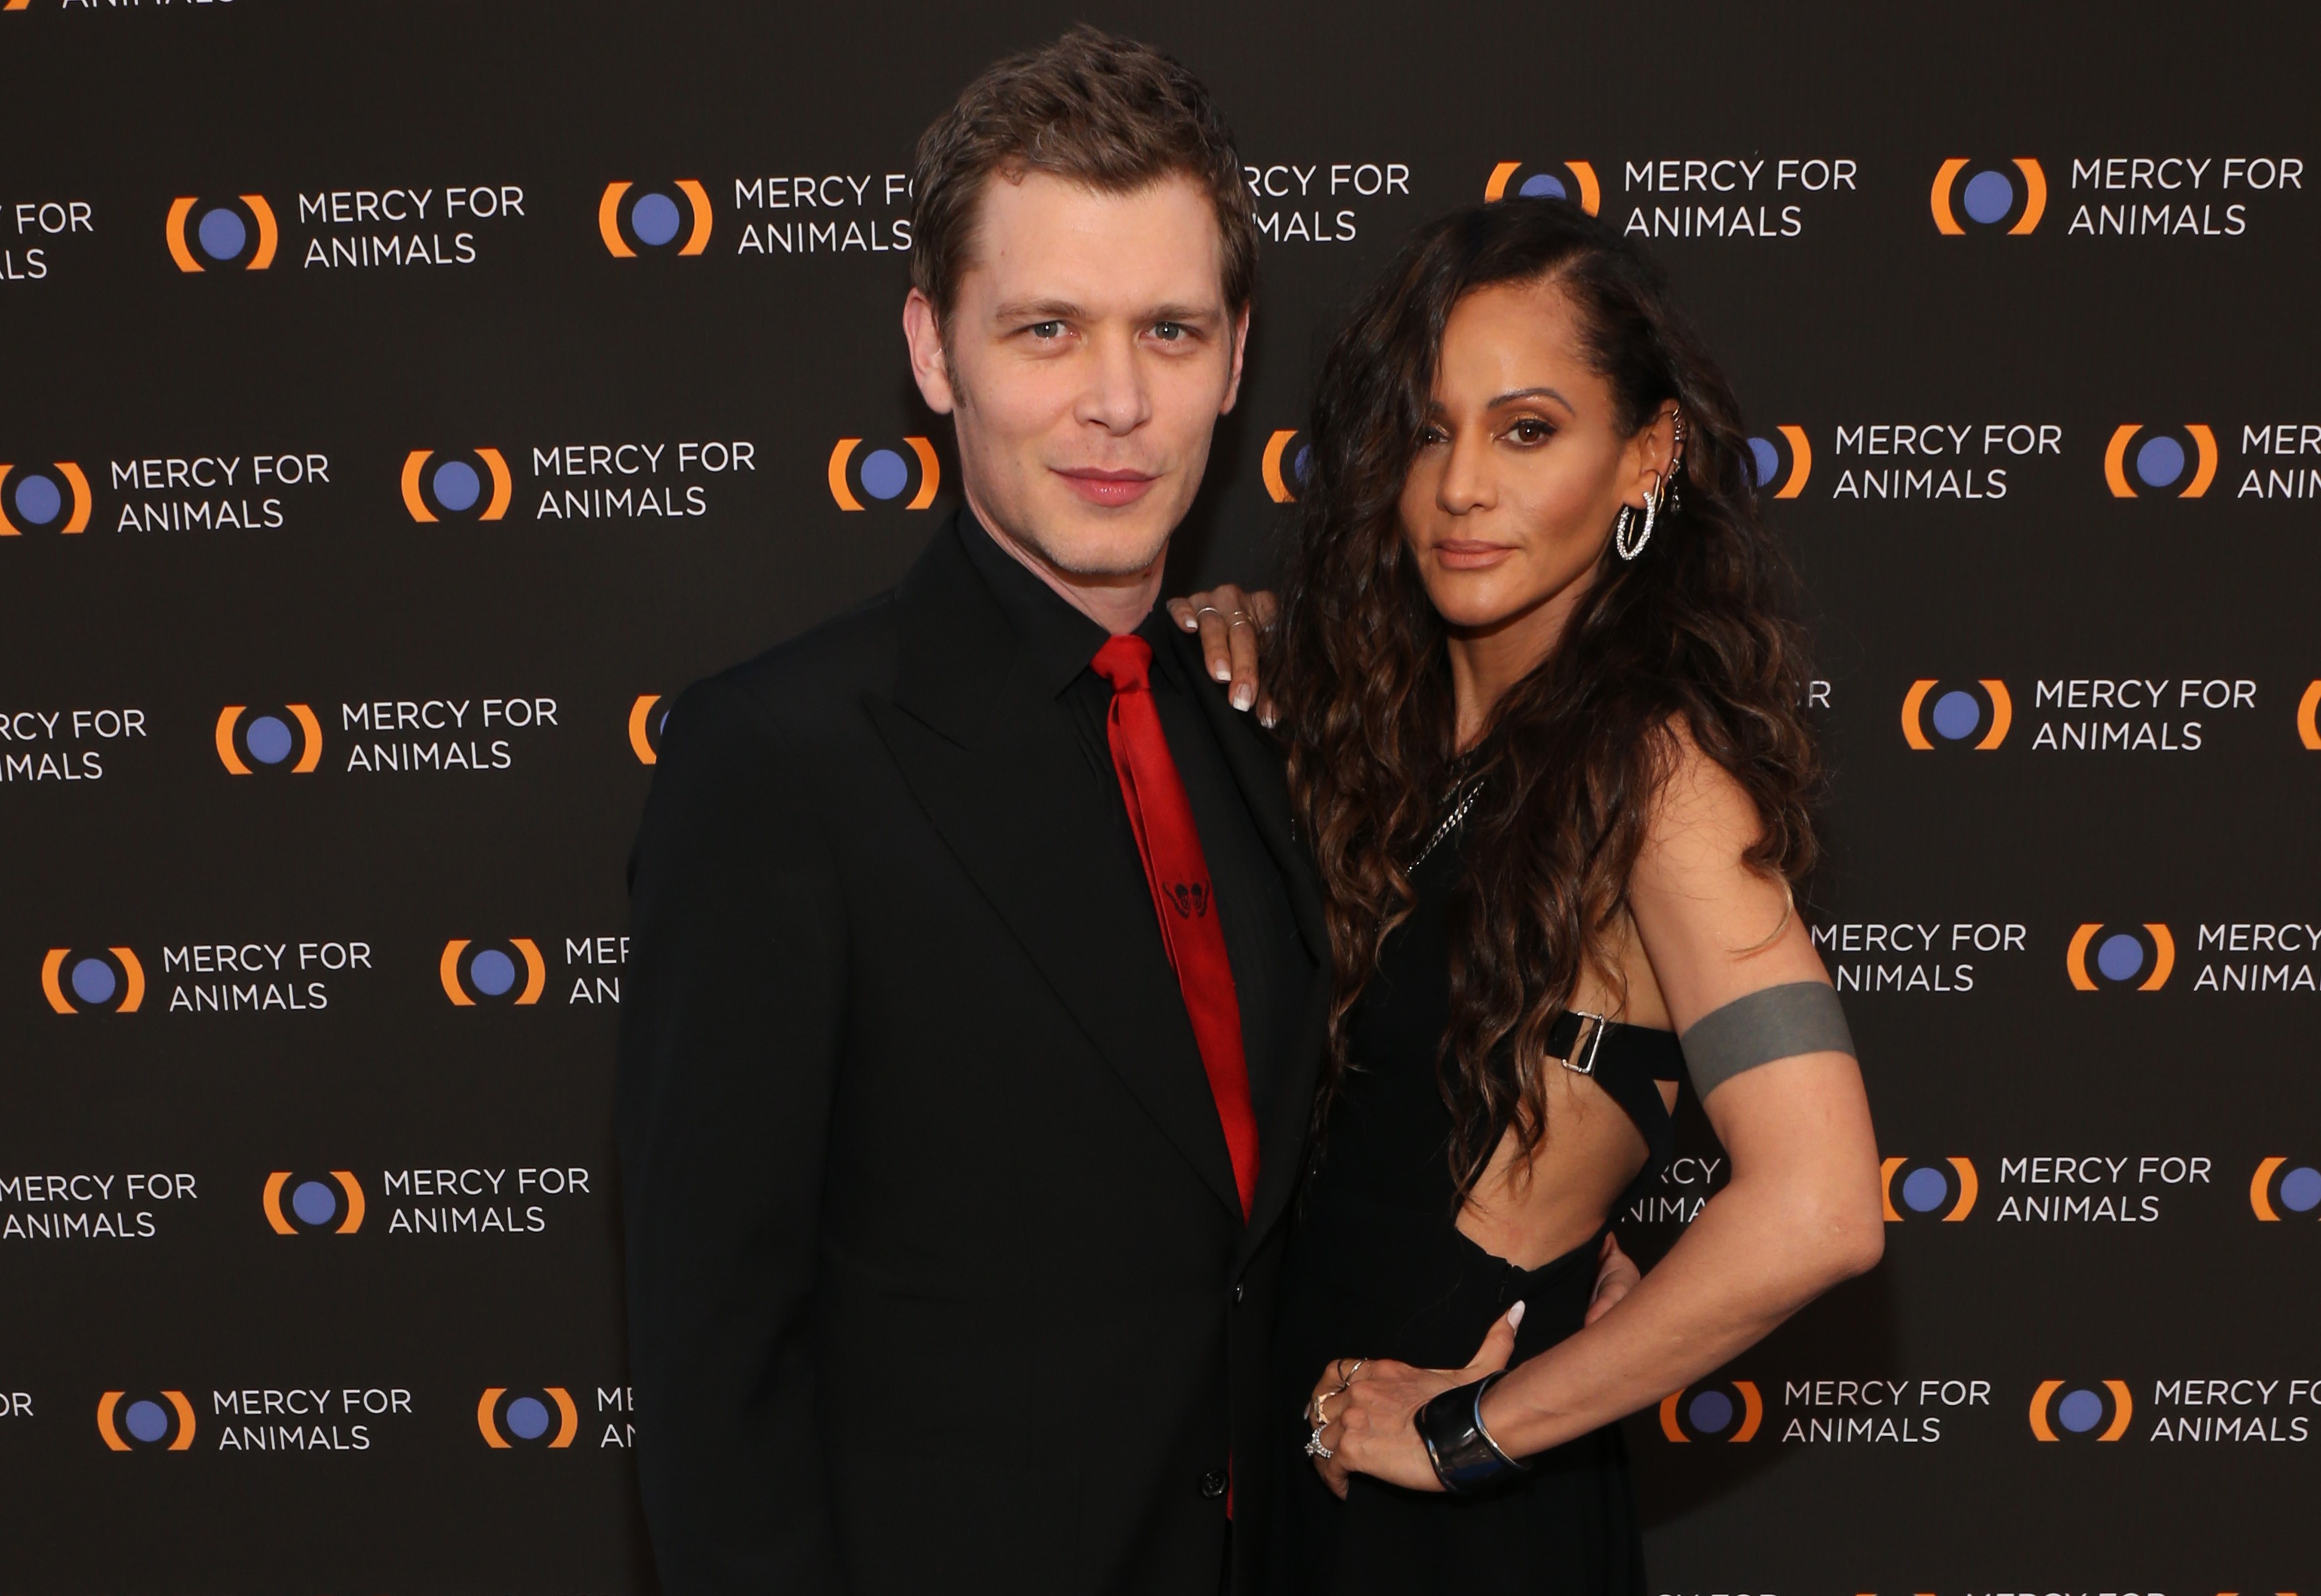 Joseph Morgan and Persia White attend the Mercy For Animals 20th Anniversary Gala at The Shrine Auditorium, on September 14, 2019, in Los Angeles, California. | Source: Getty Images